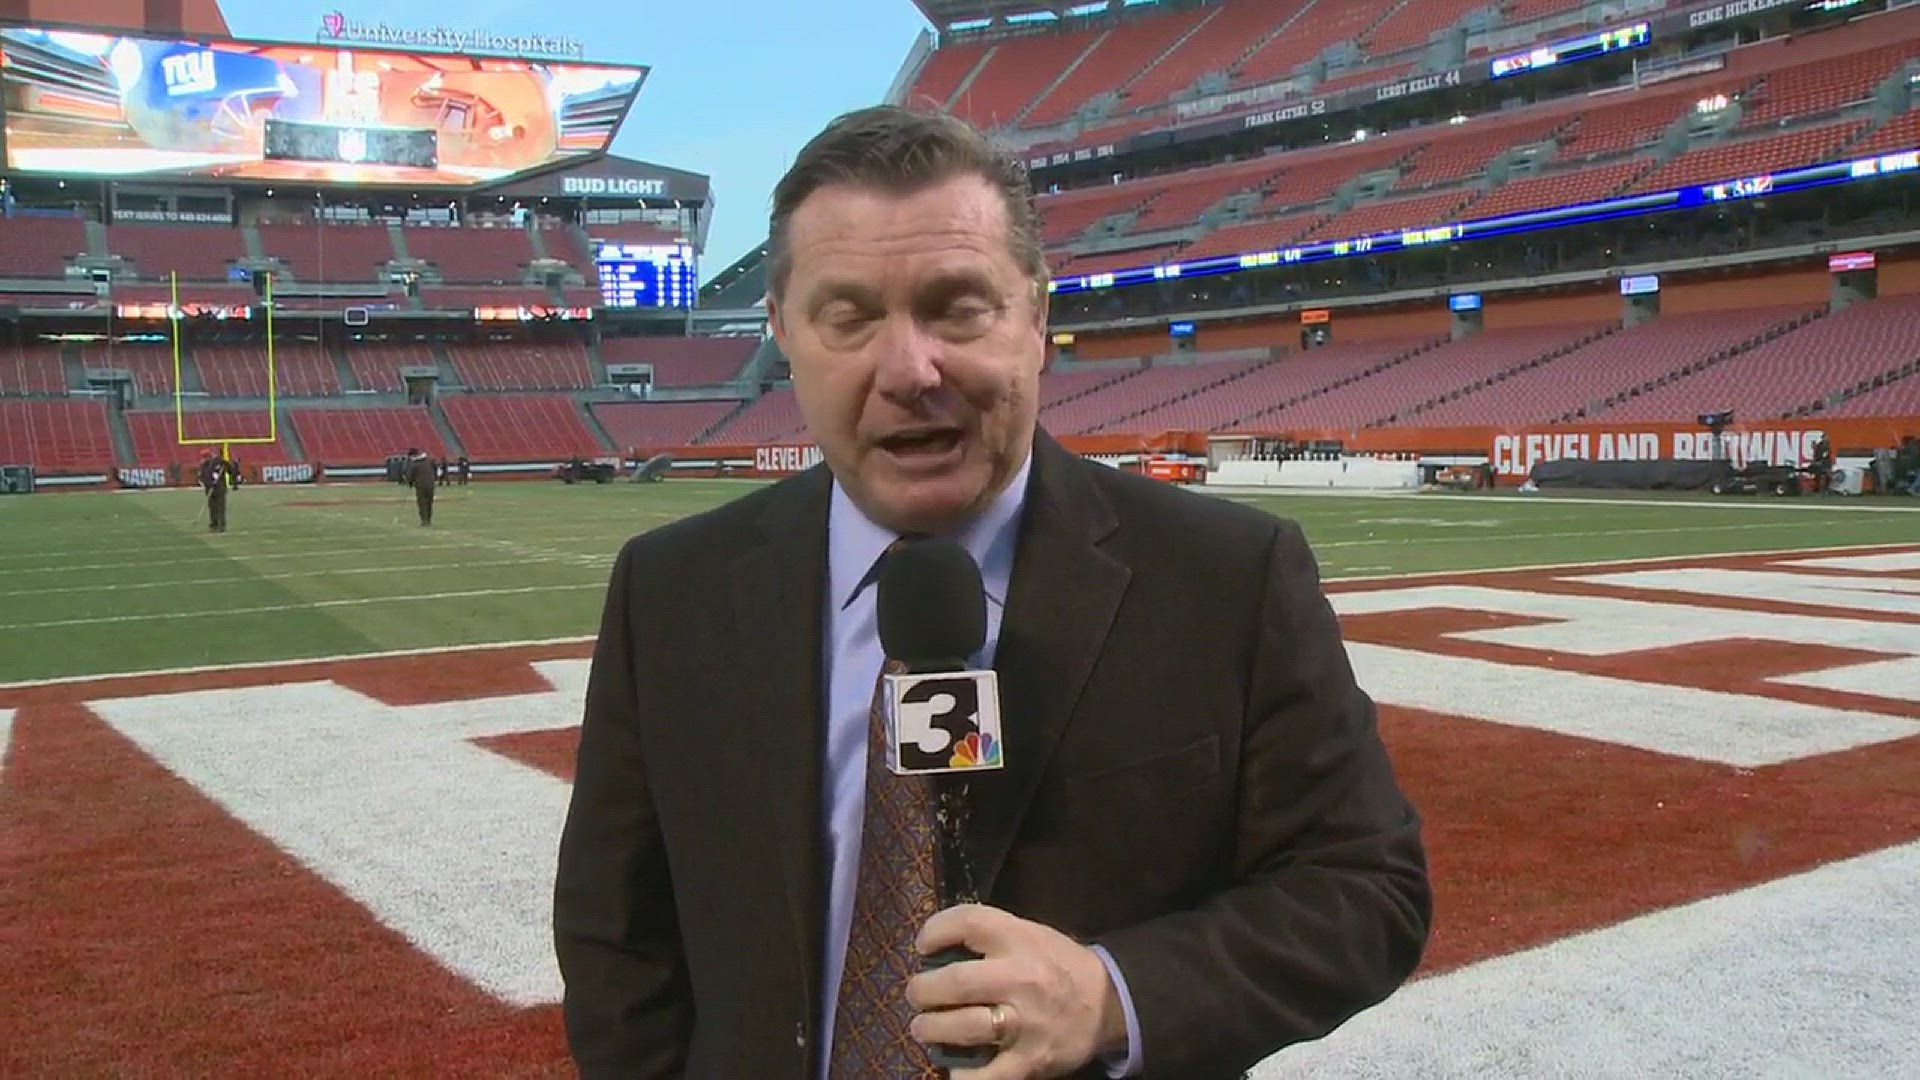 Here's Jimmy's Take for the Browns vs. Giants game November 27.